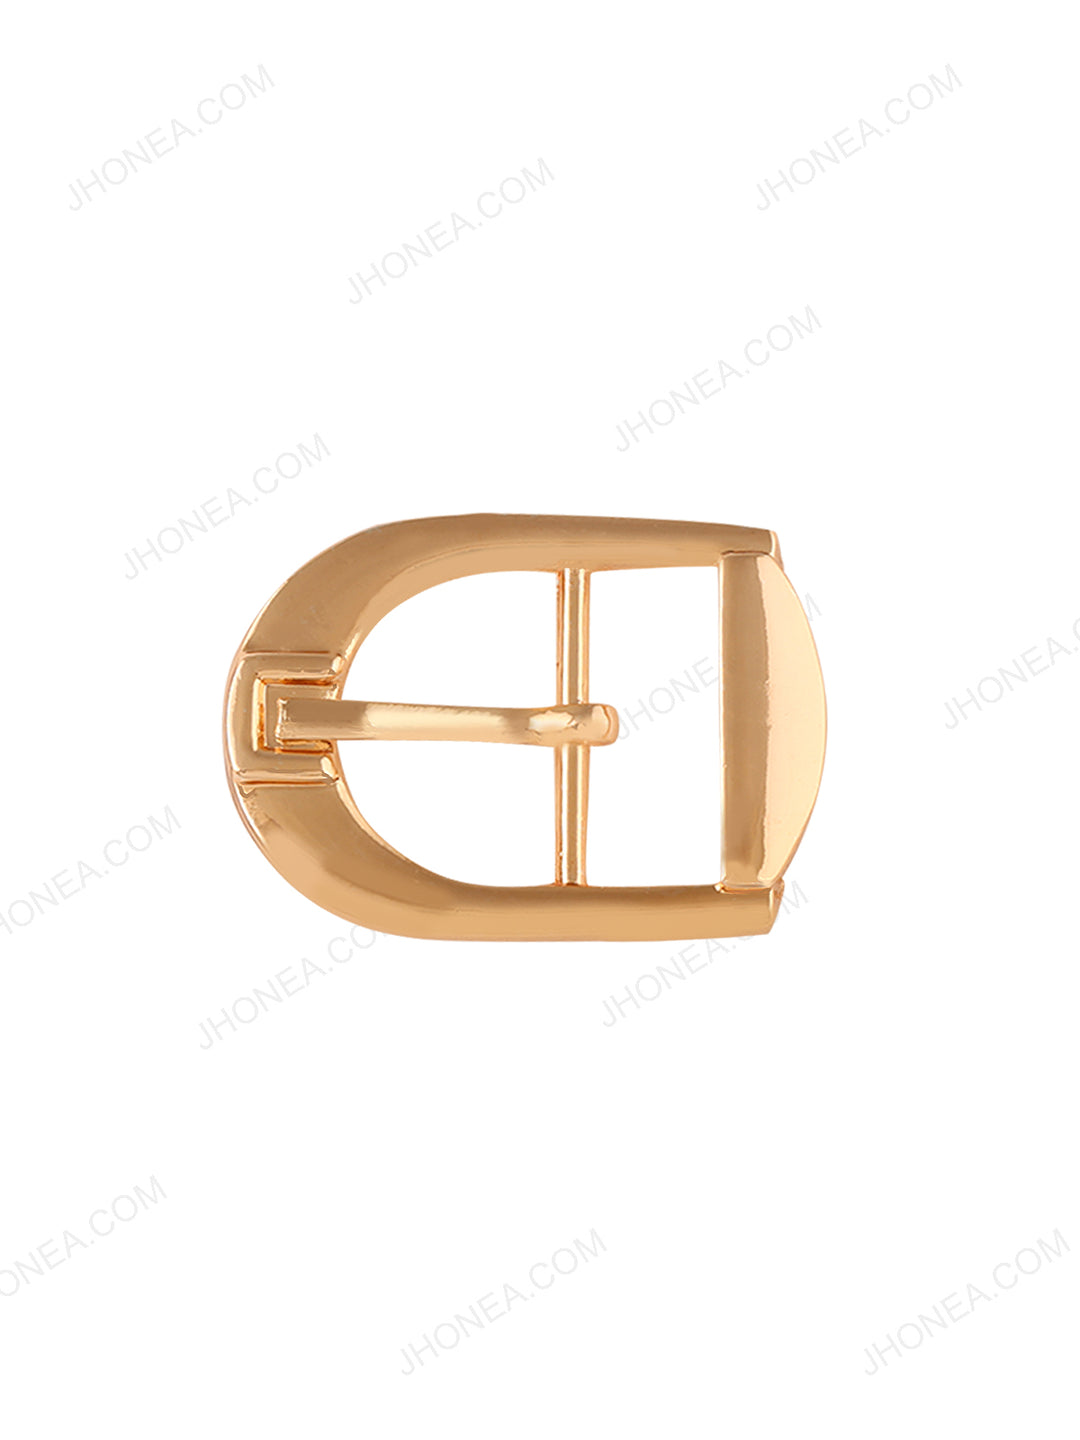 Simple Design Classic Shiny Gold Round Ring Belt Buckle – JHONEA